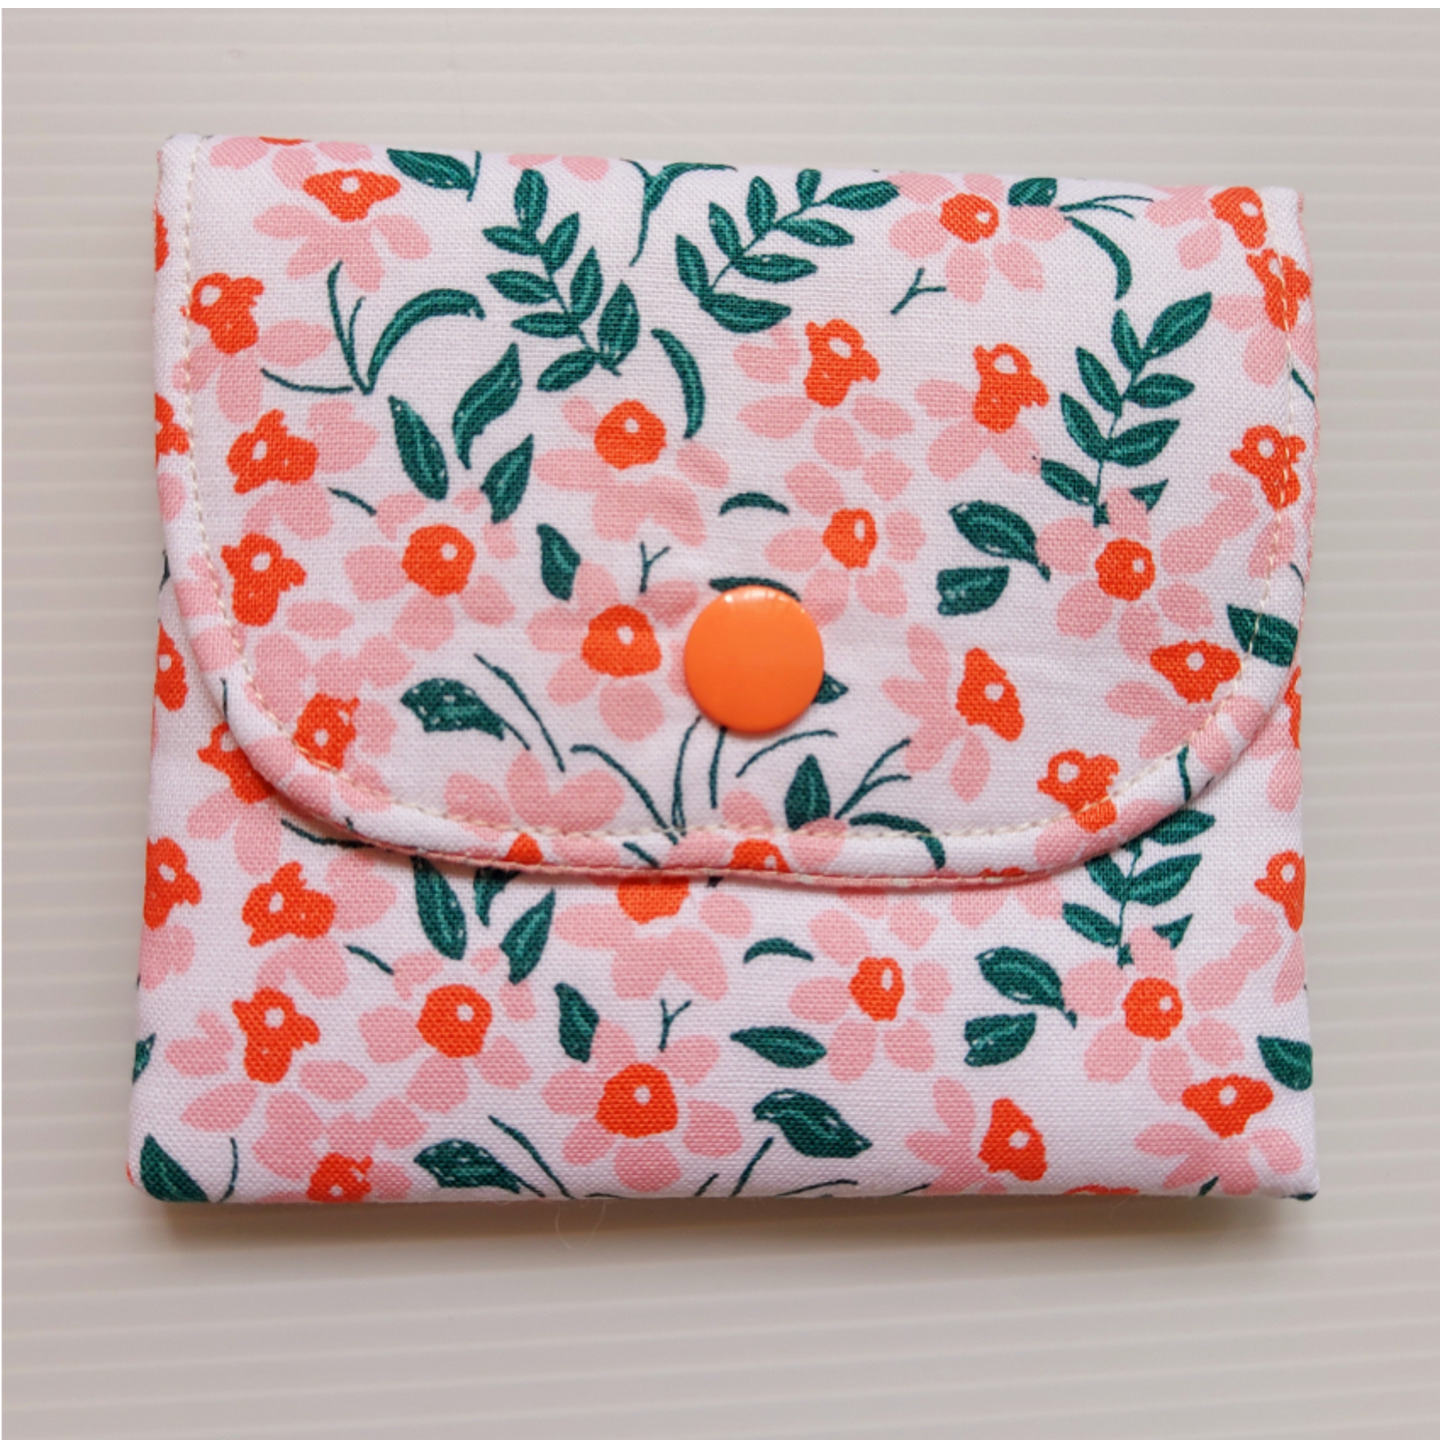 Snap Purse (Floral White/Pink)